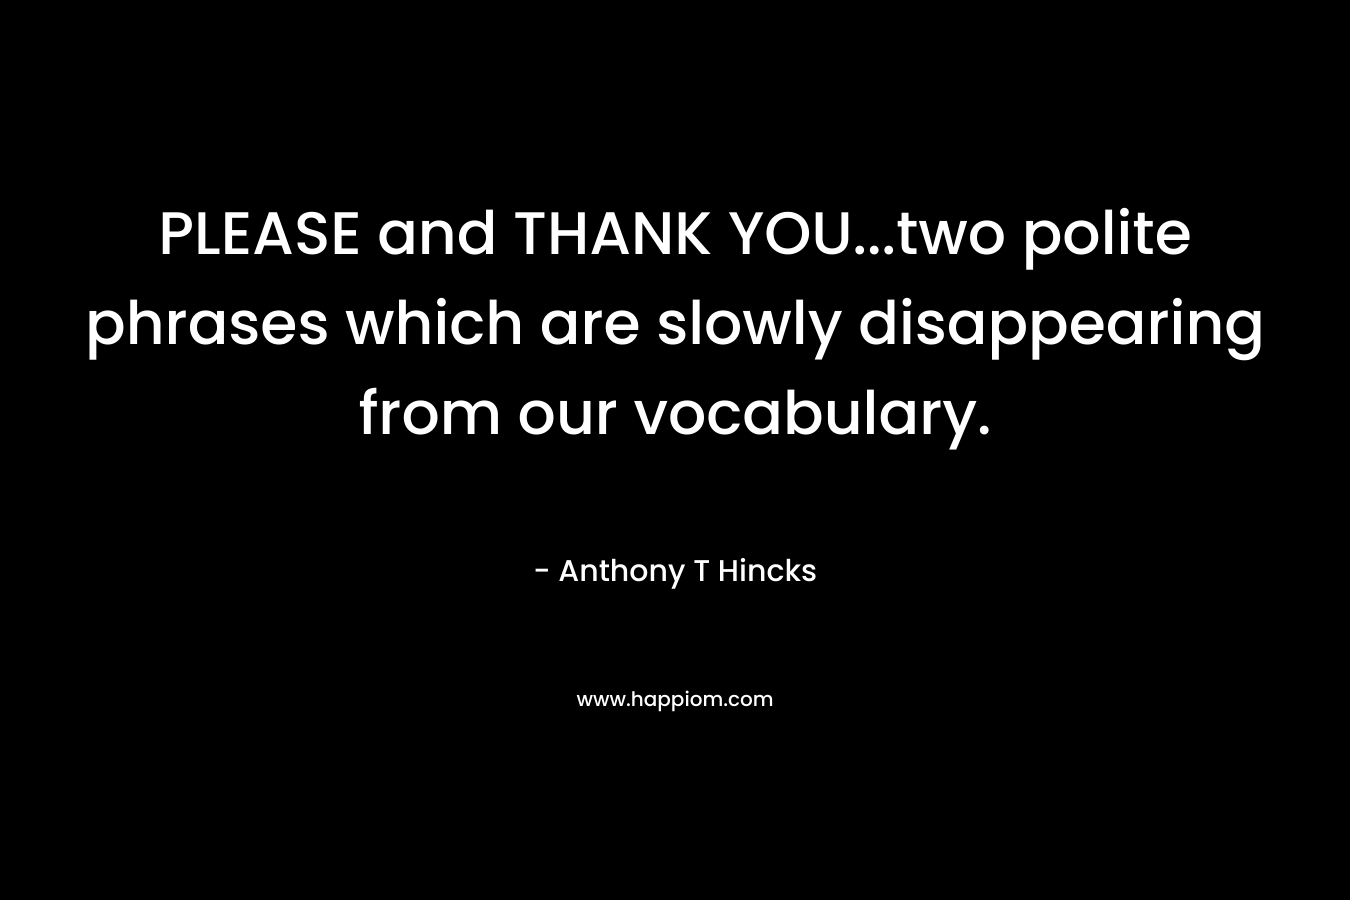 PLEASE and THANK YOU...two polite phrases which are slowly disappearing from our vocabulary.